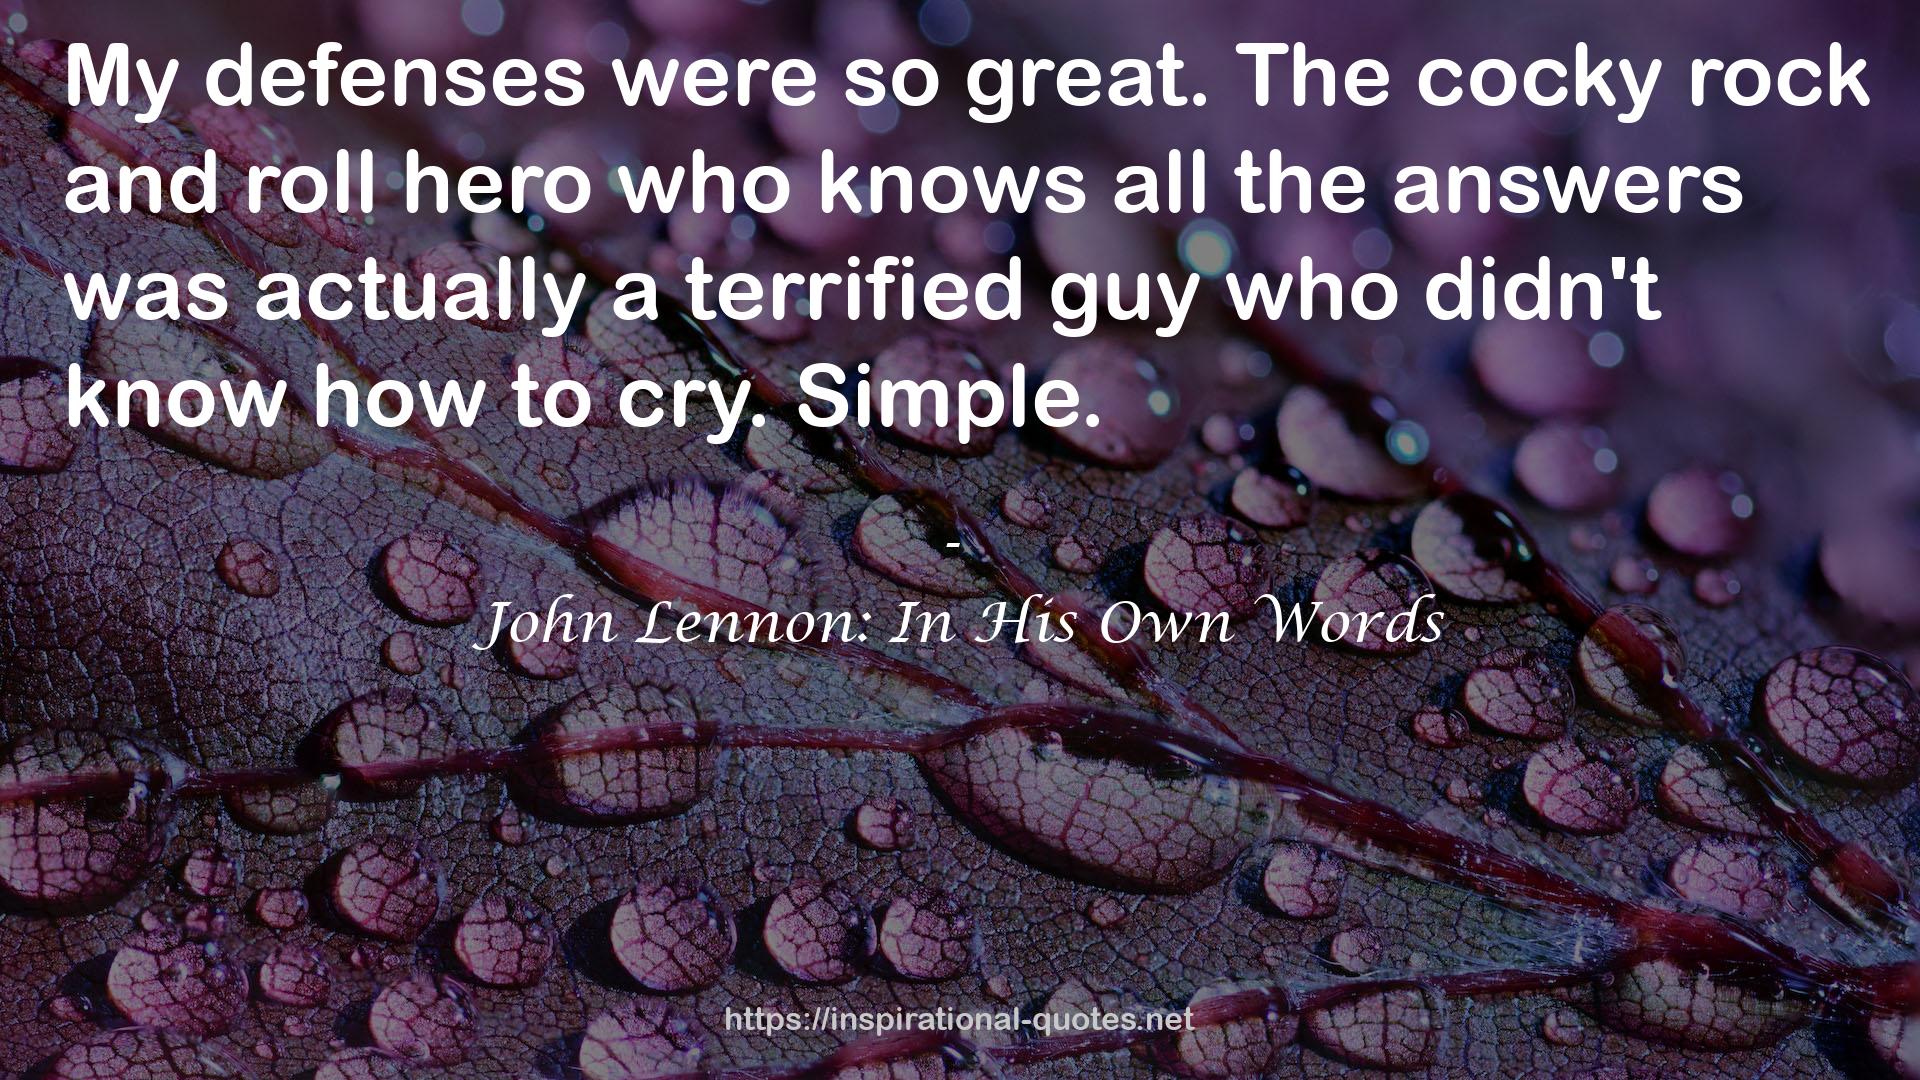 John Lennon: In His Own Words QUOTES